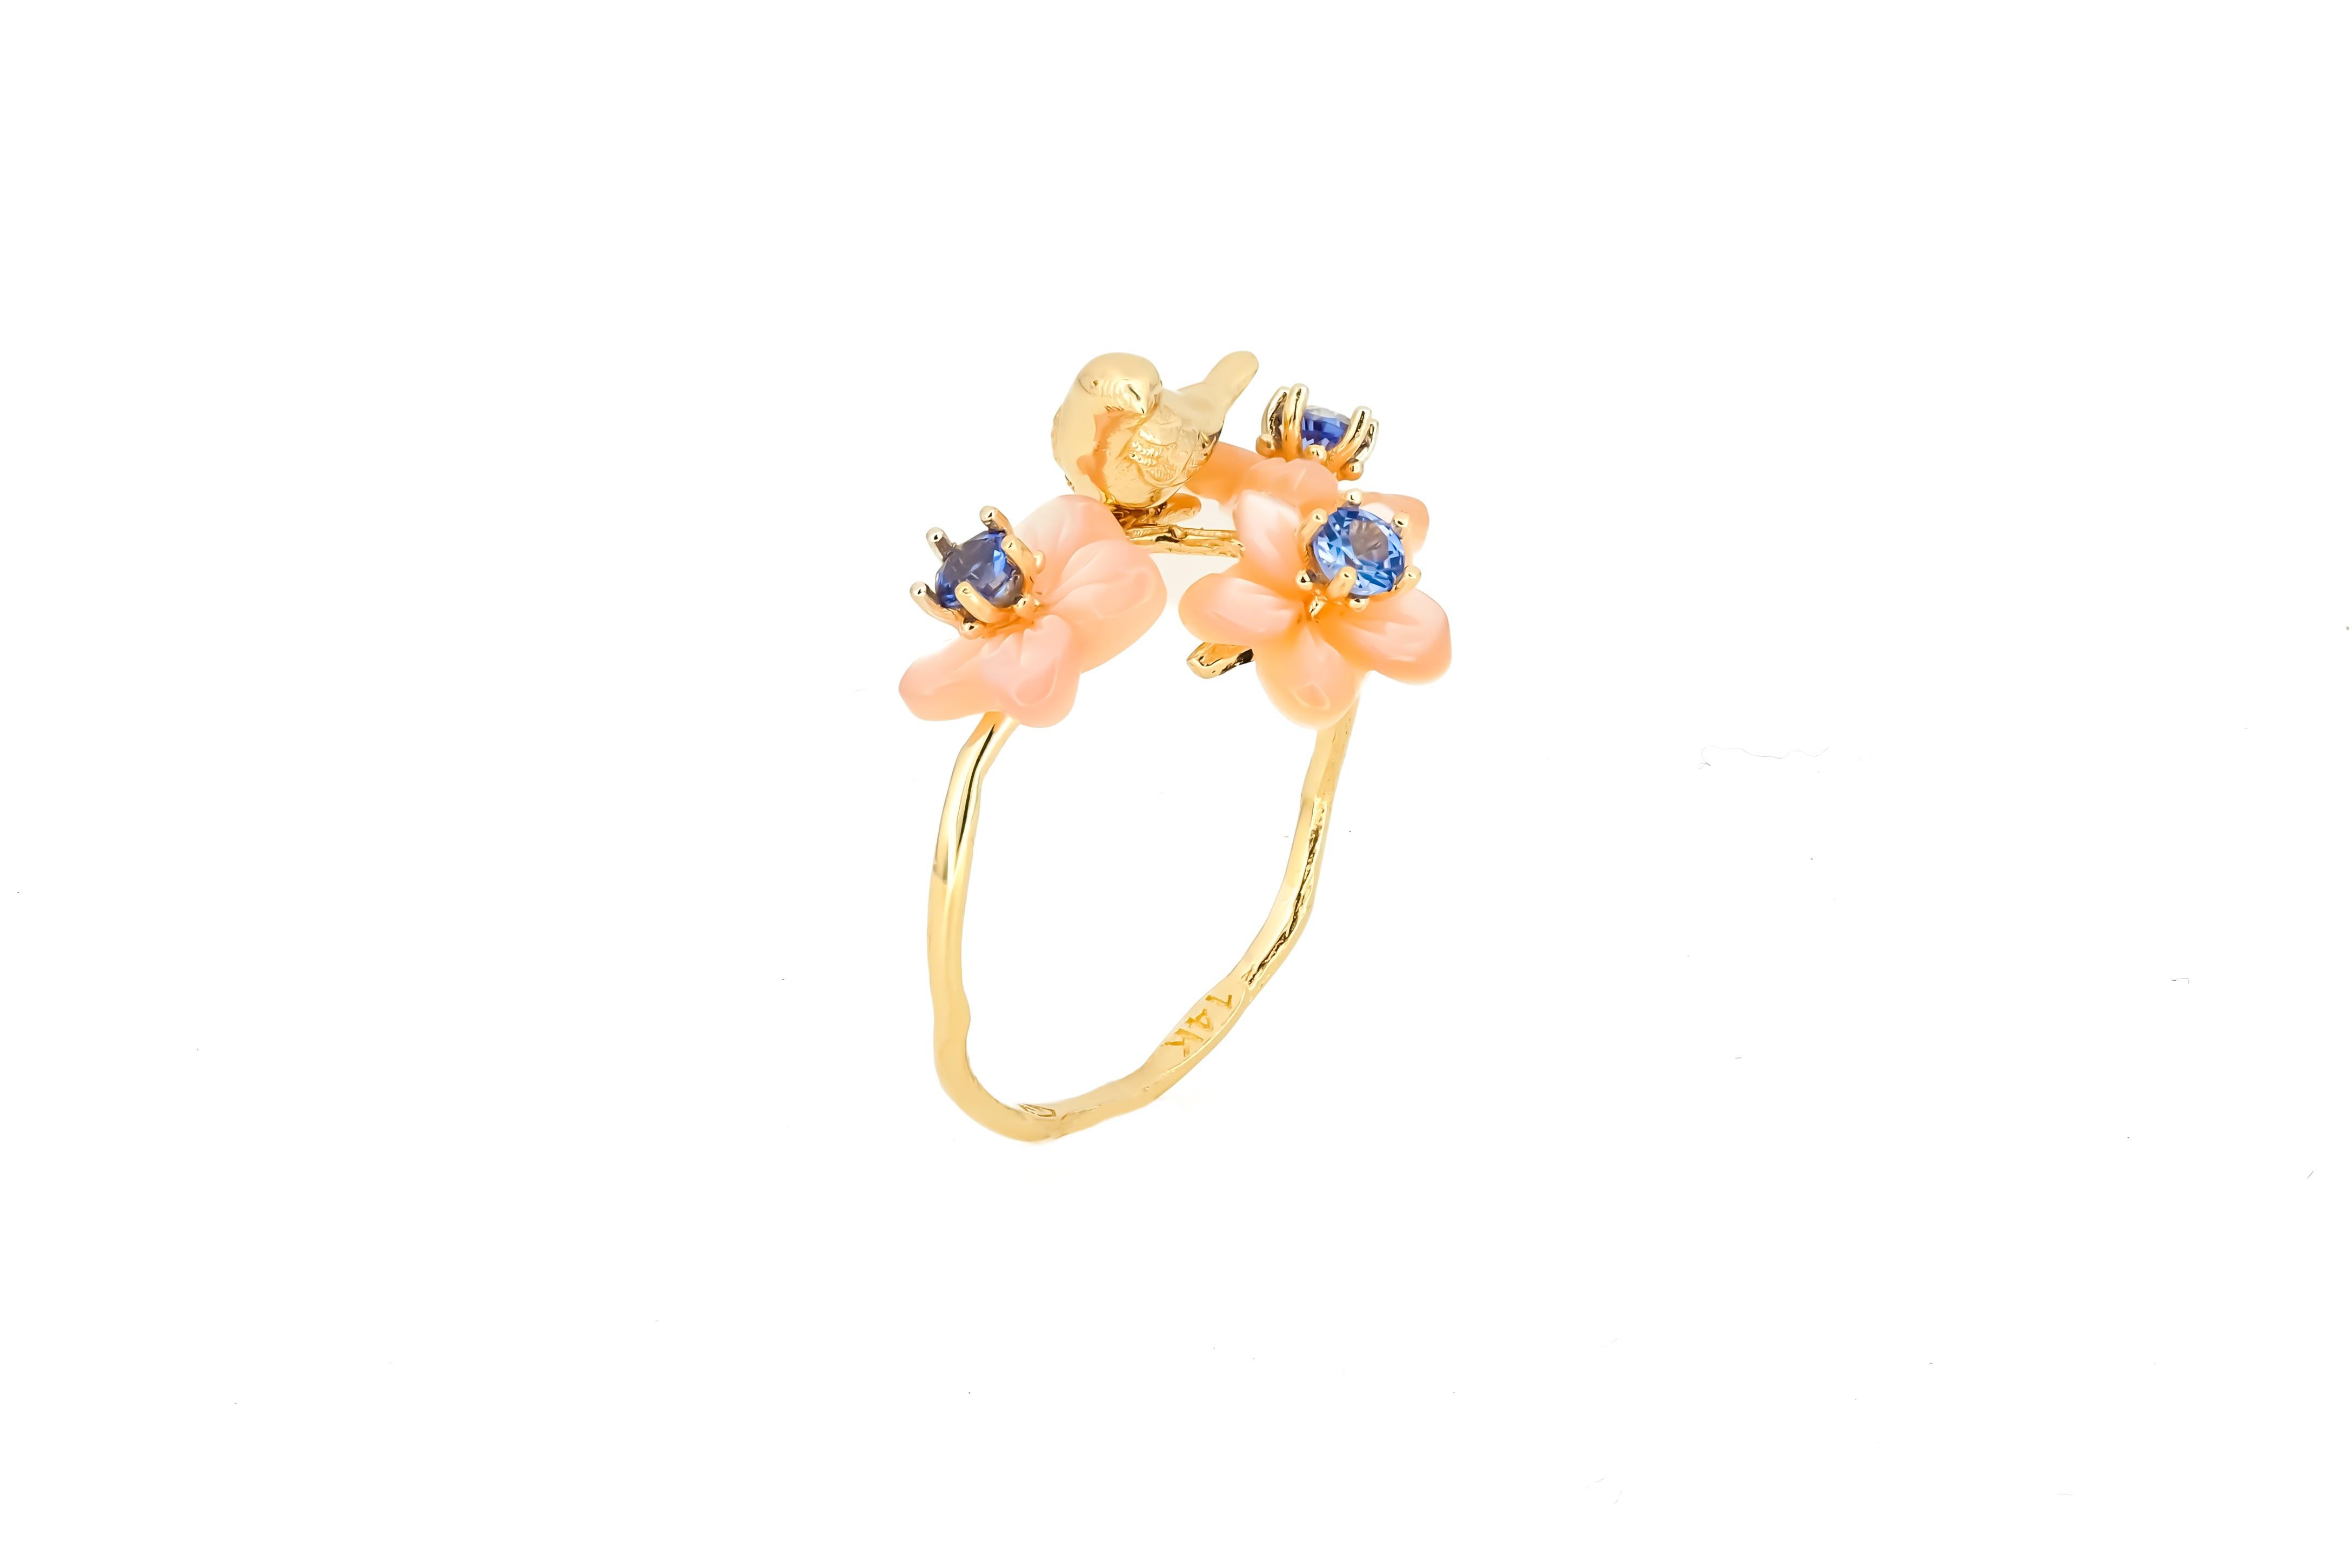 For Sale:  14k Gold Bird on Branch Ring. Sapphires and Carved Mother of Pearl ring! 6